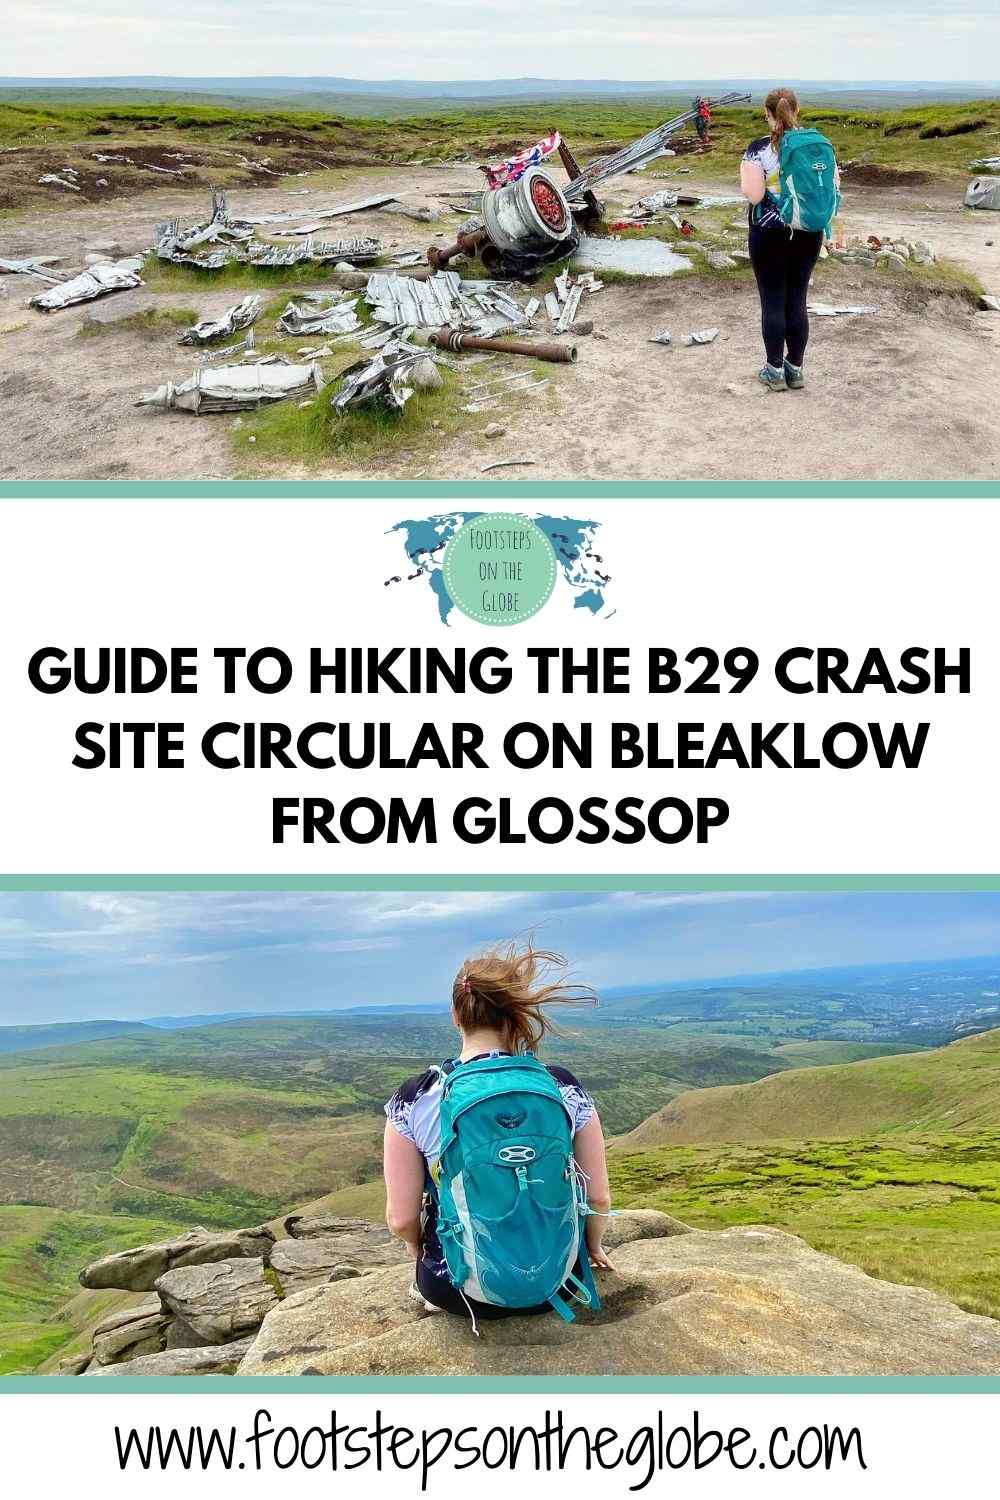 Pinterest image of Mel looking over the Glossop Valley and B29 crash site with the text: "Guide to hiking the B29 crash site circular on Bleaklow from Glossop"